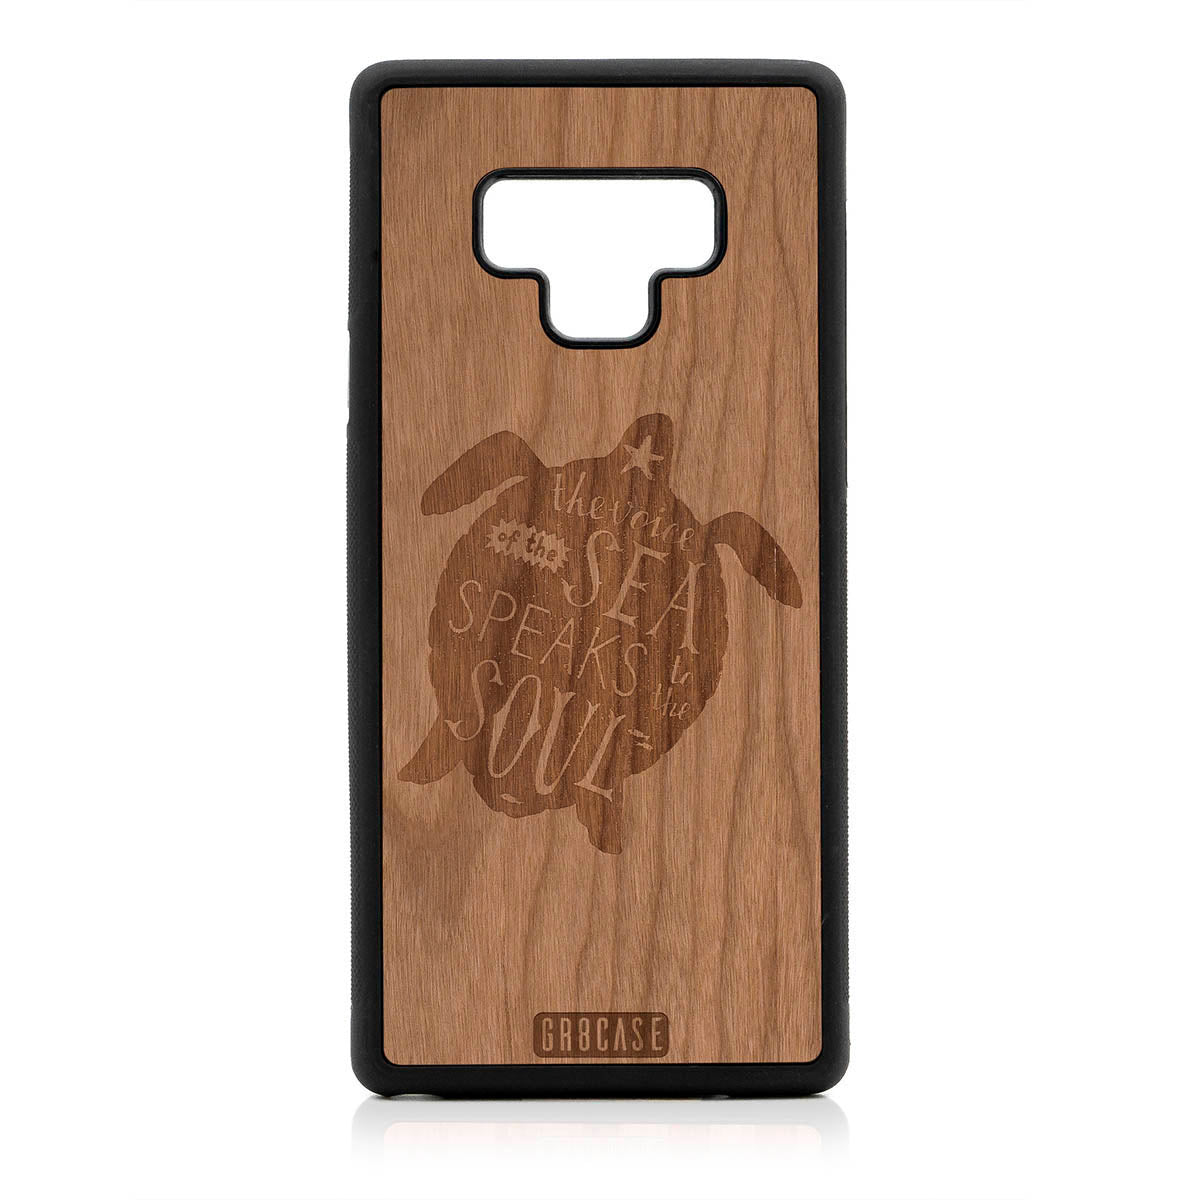 The Voice Of The Sea Speaks To The Soul (Turtle) Design Wood Case For Samsung Galaxy Note 9